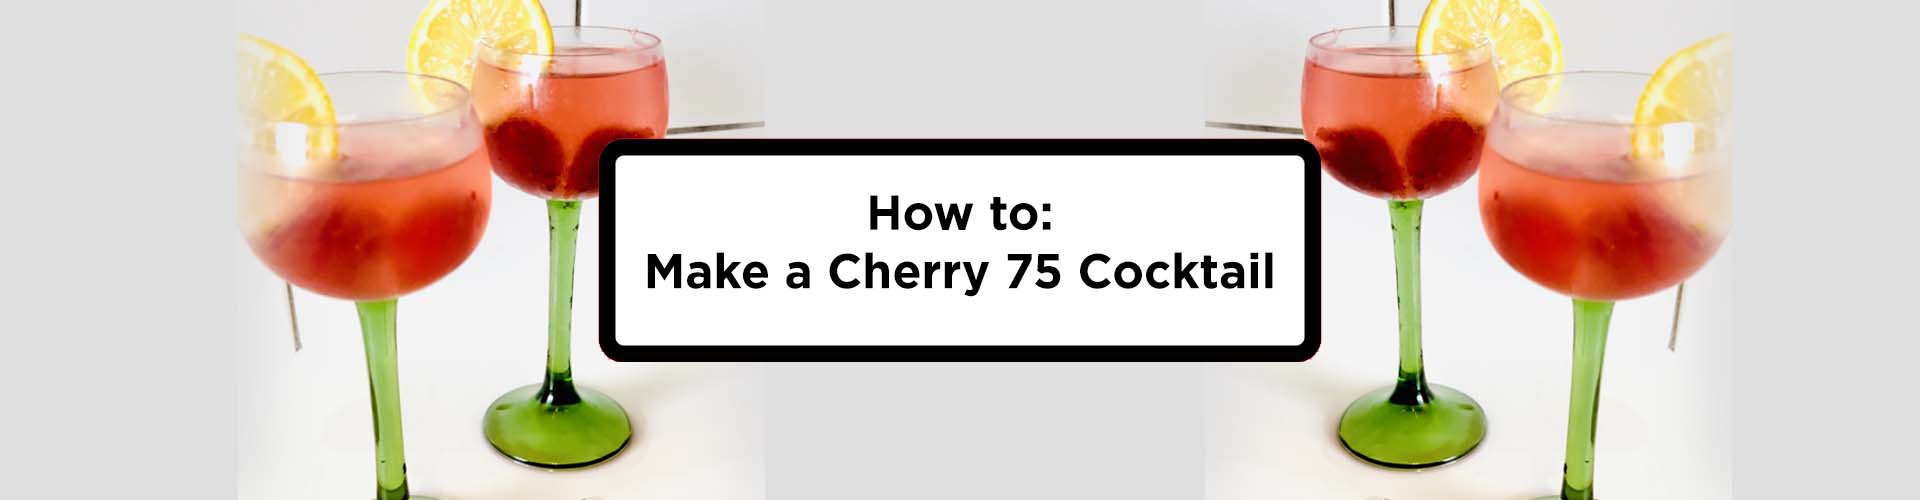 How to: Make a Cherry 75 Cocktail